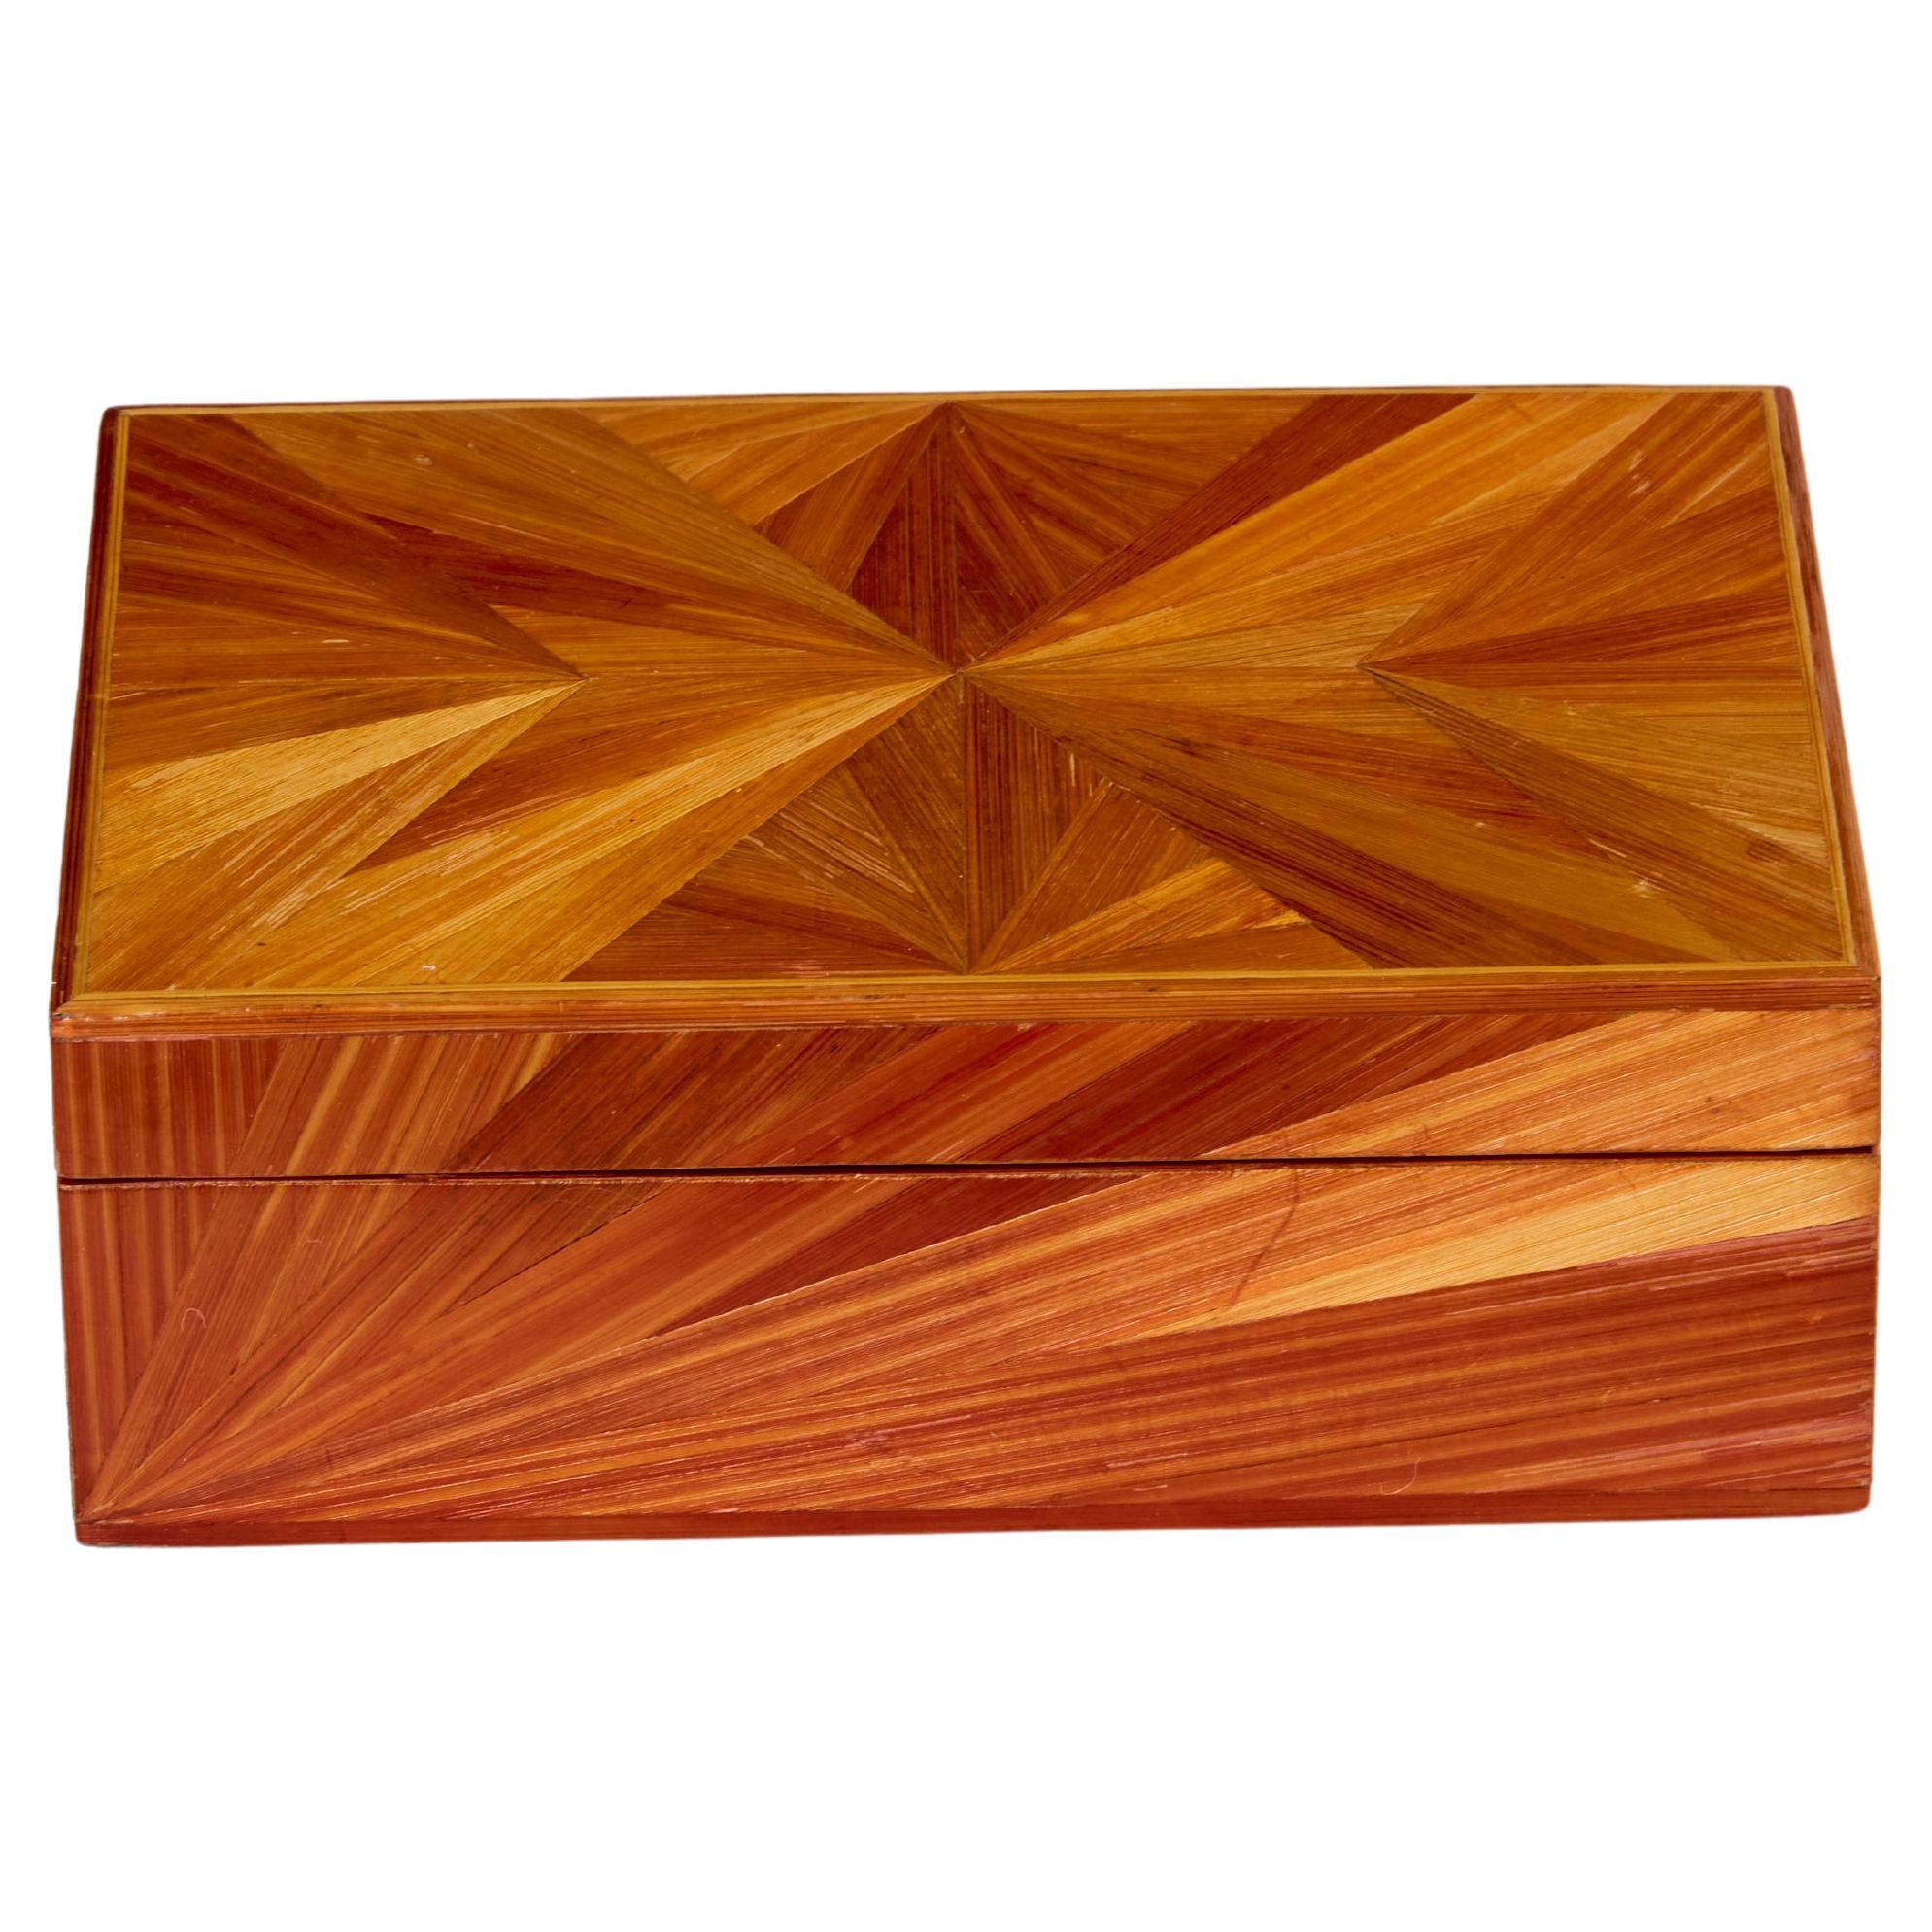 Jean-Michel Franck Straw Marquetry Box, 1930 For Sale